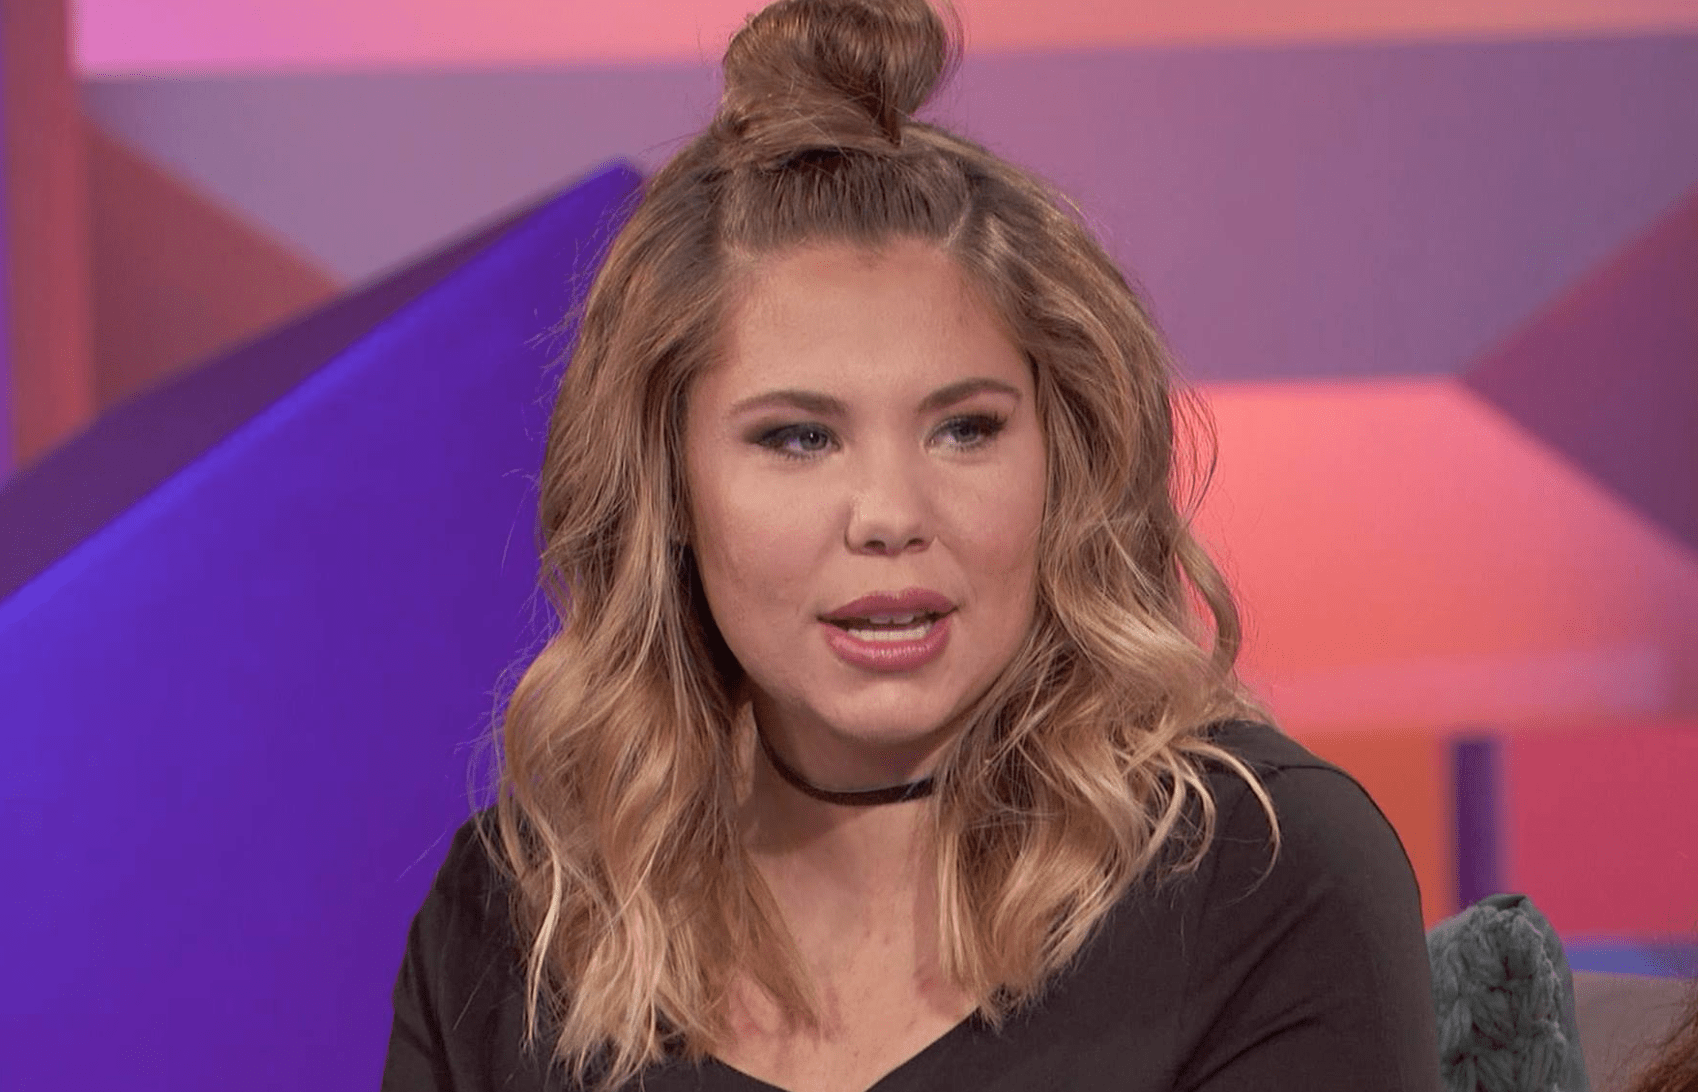 Who Is Kail Lowry’s Baby Daddy? New Boyfriend Offered Money To Star On